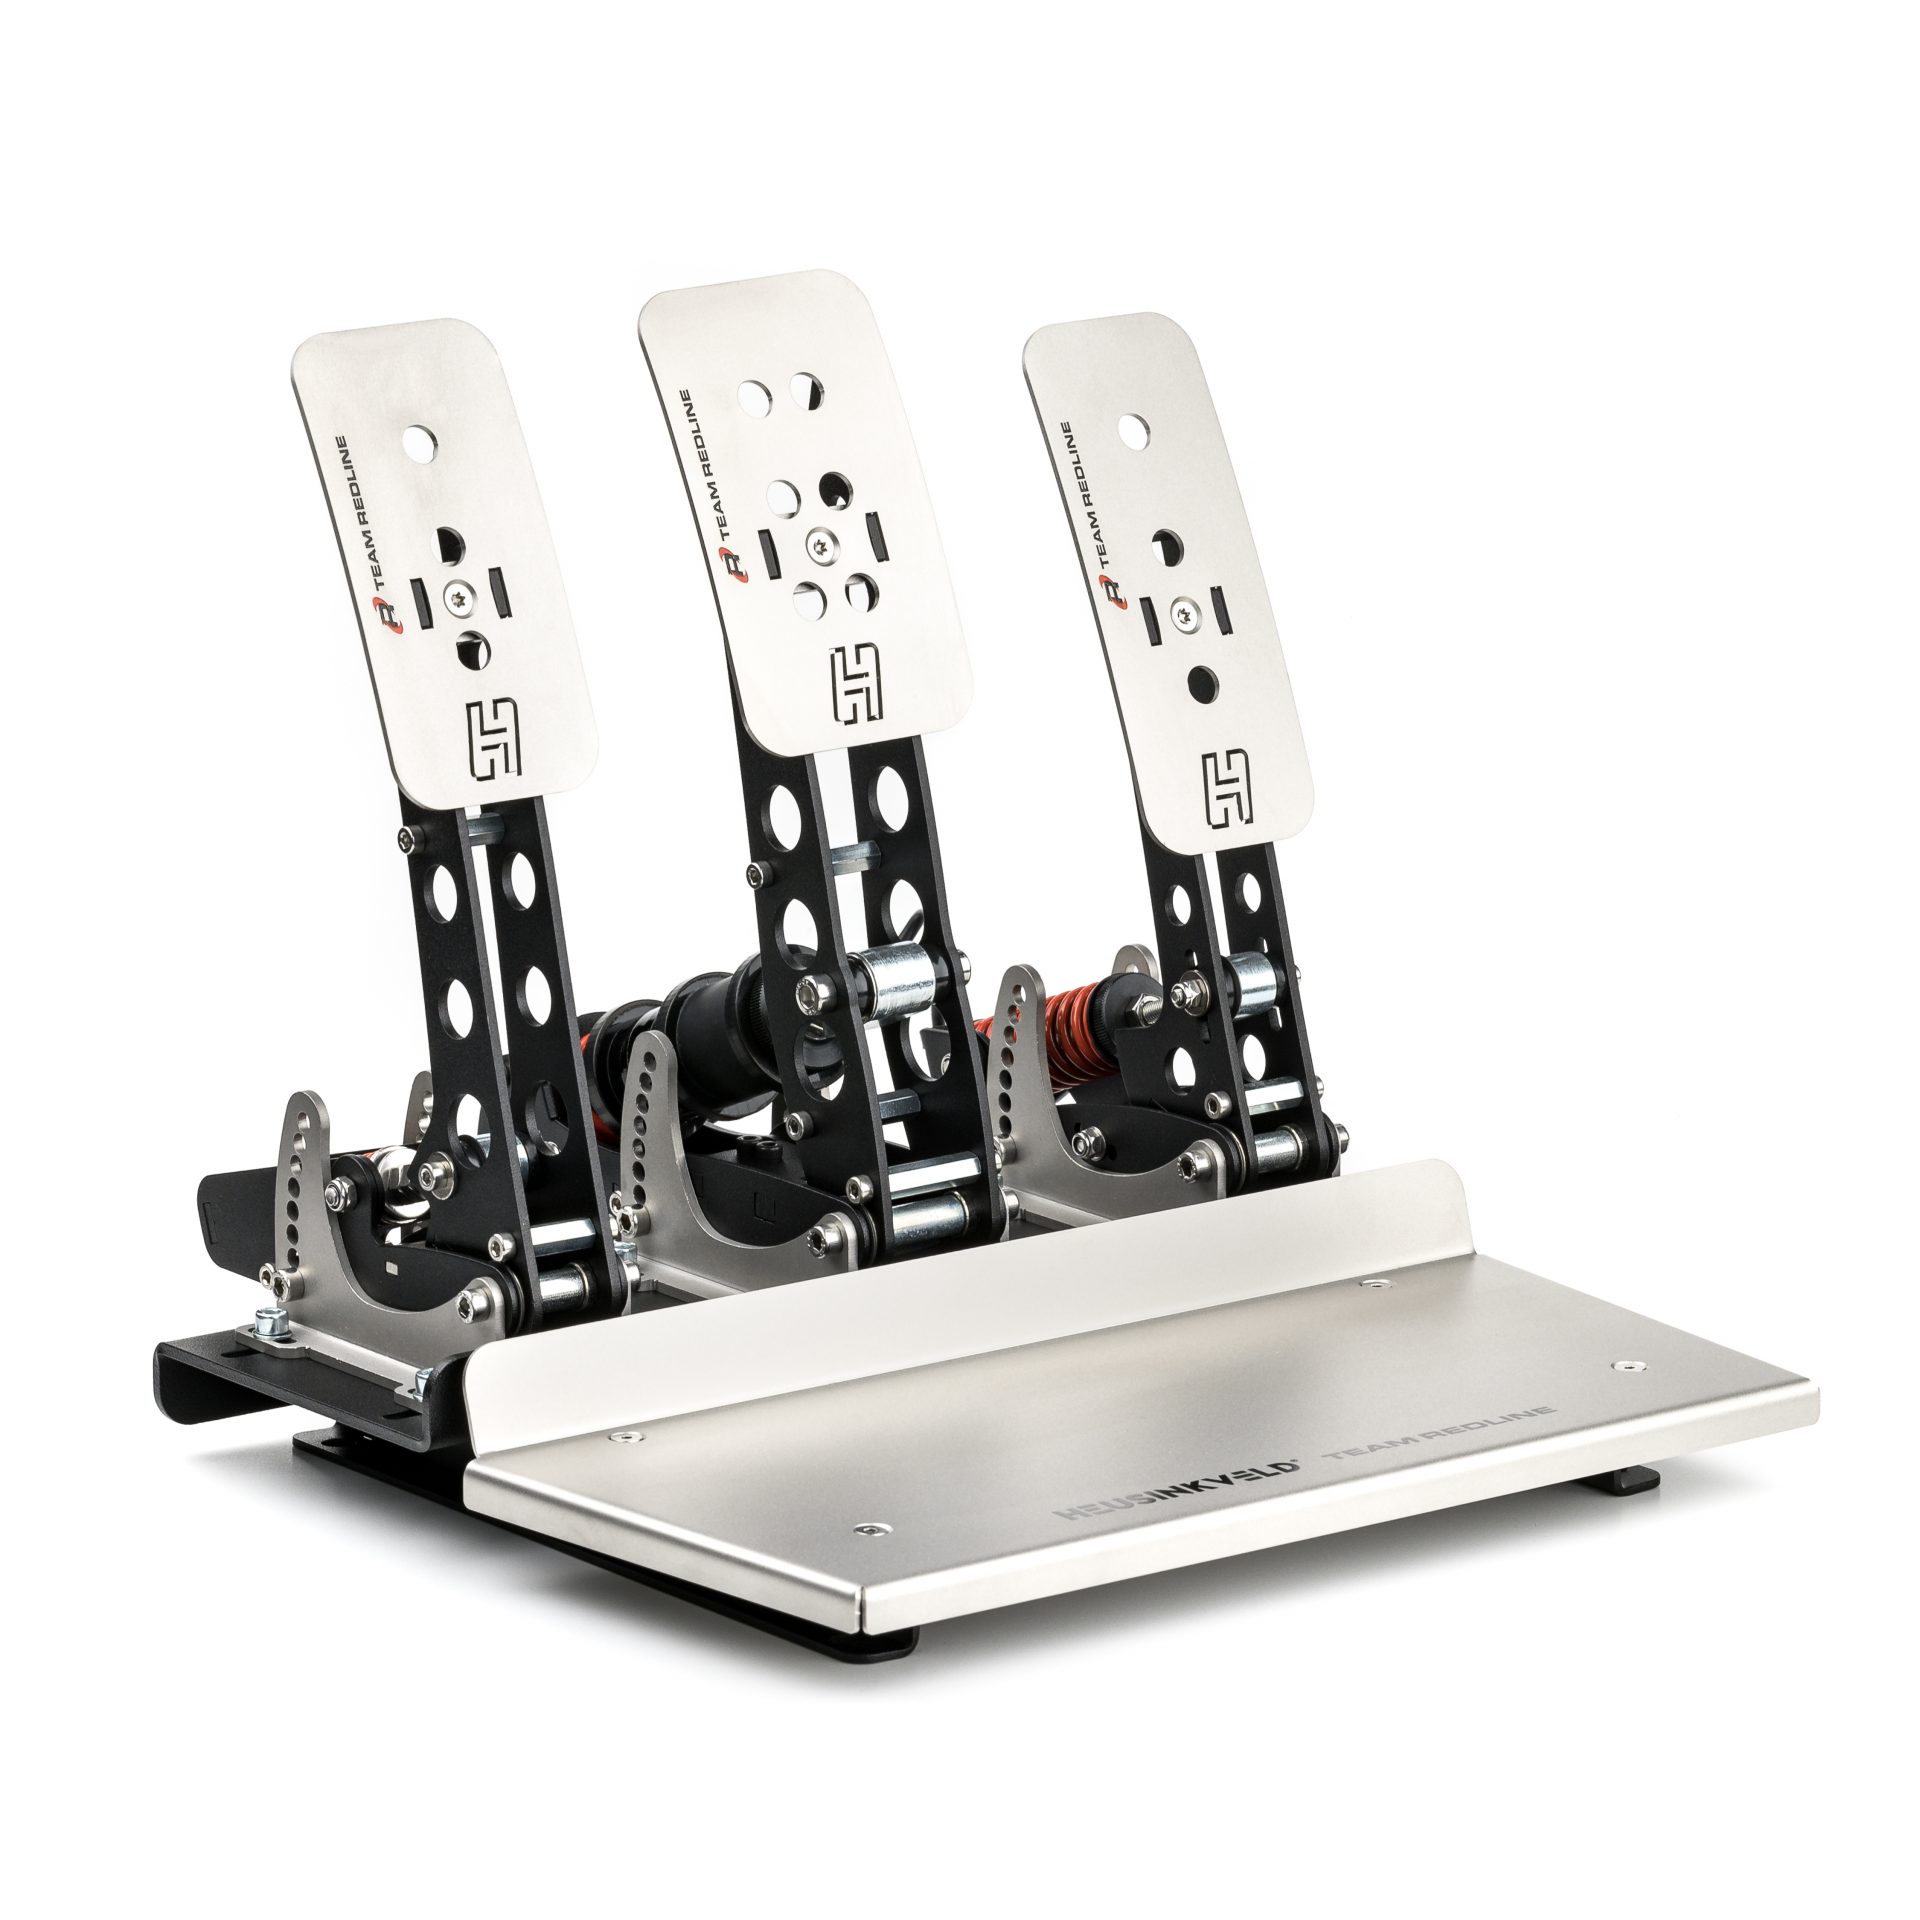 THE SIM PEDALS SPRINT – TEAM REDLINE EDITION AVAILABLE NOW